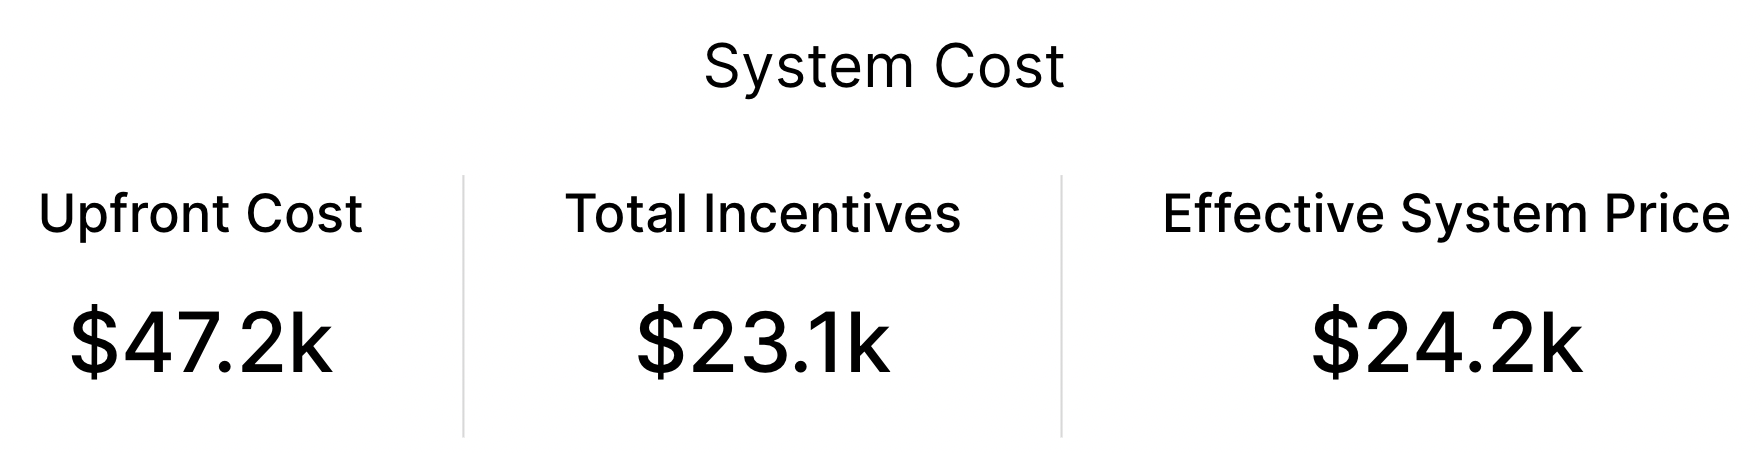 System Cost Overview